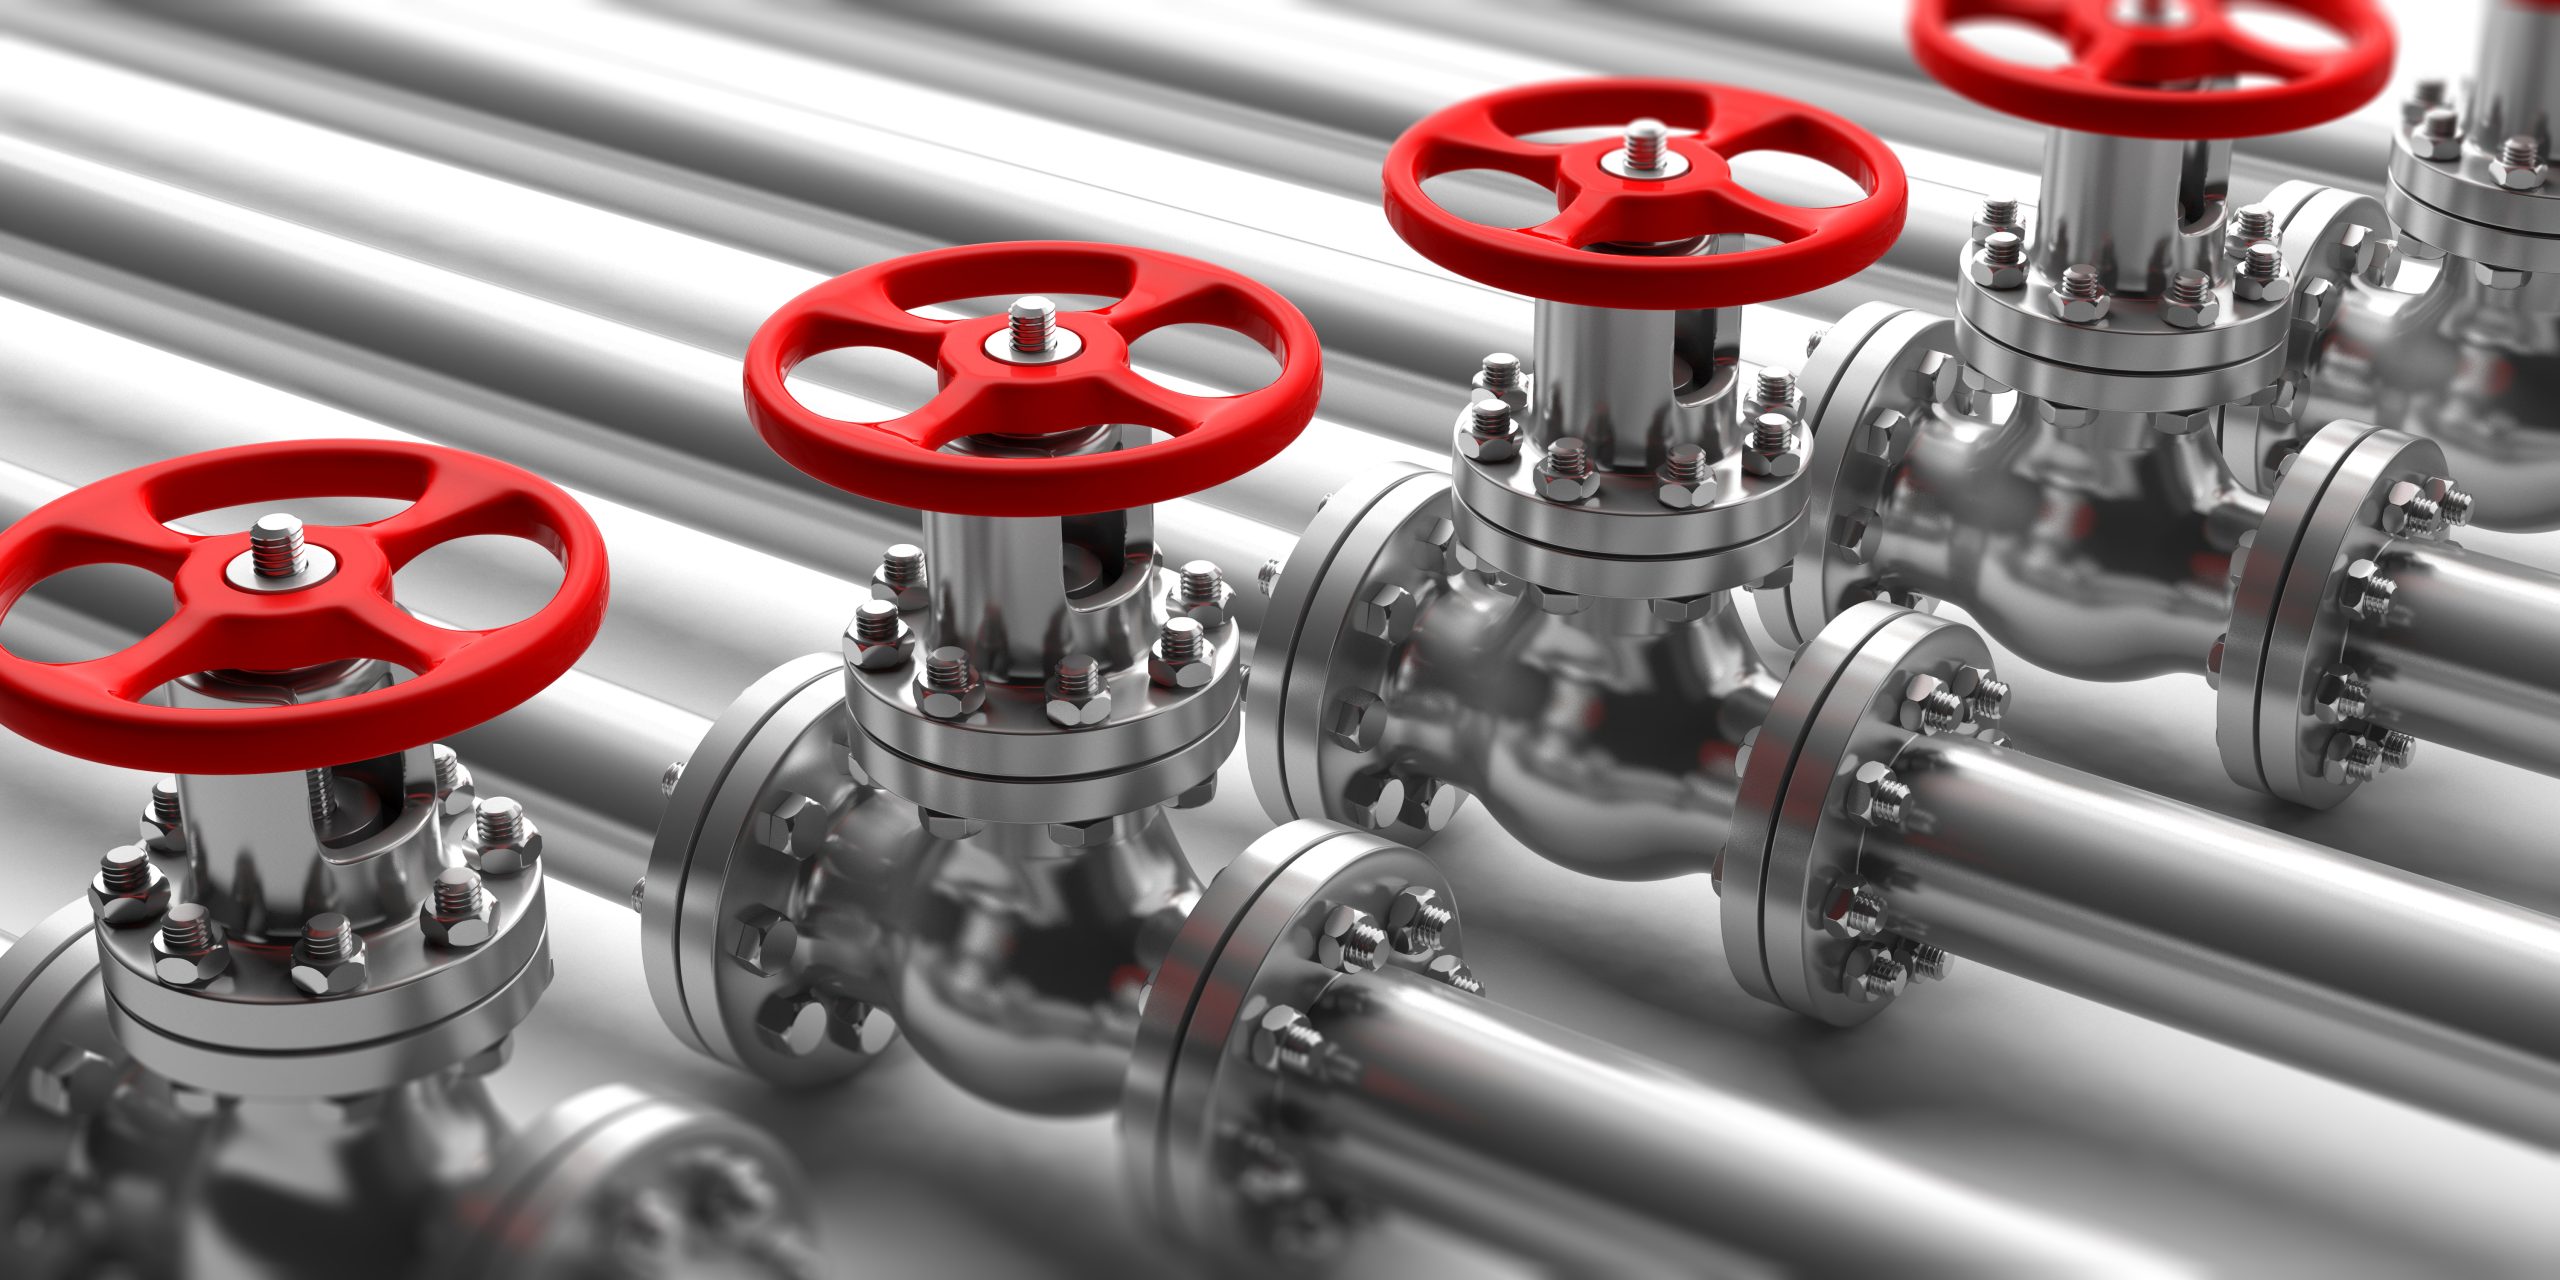 Industrial pipelines and valves with red wheels on white background. Closeup view with details. 3d illustration